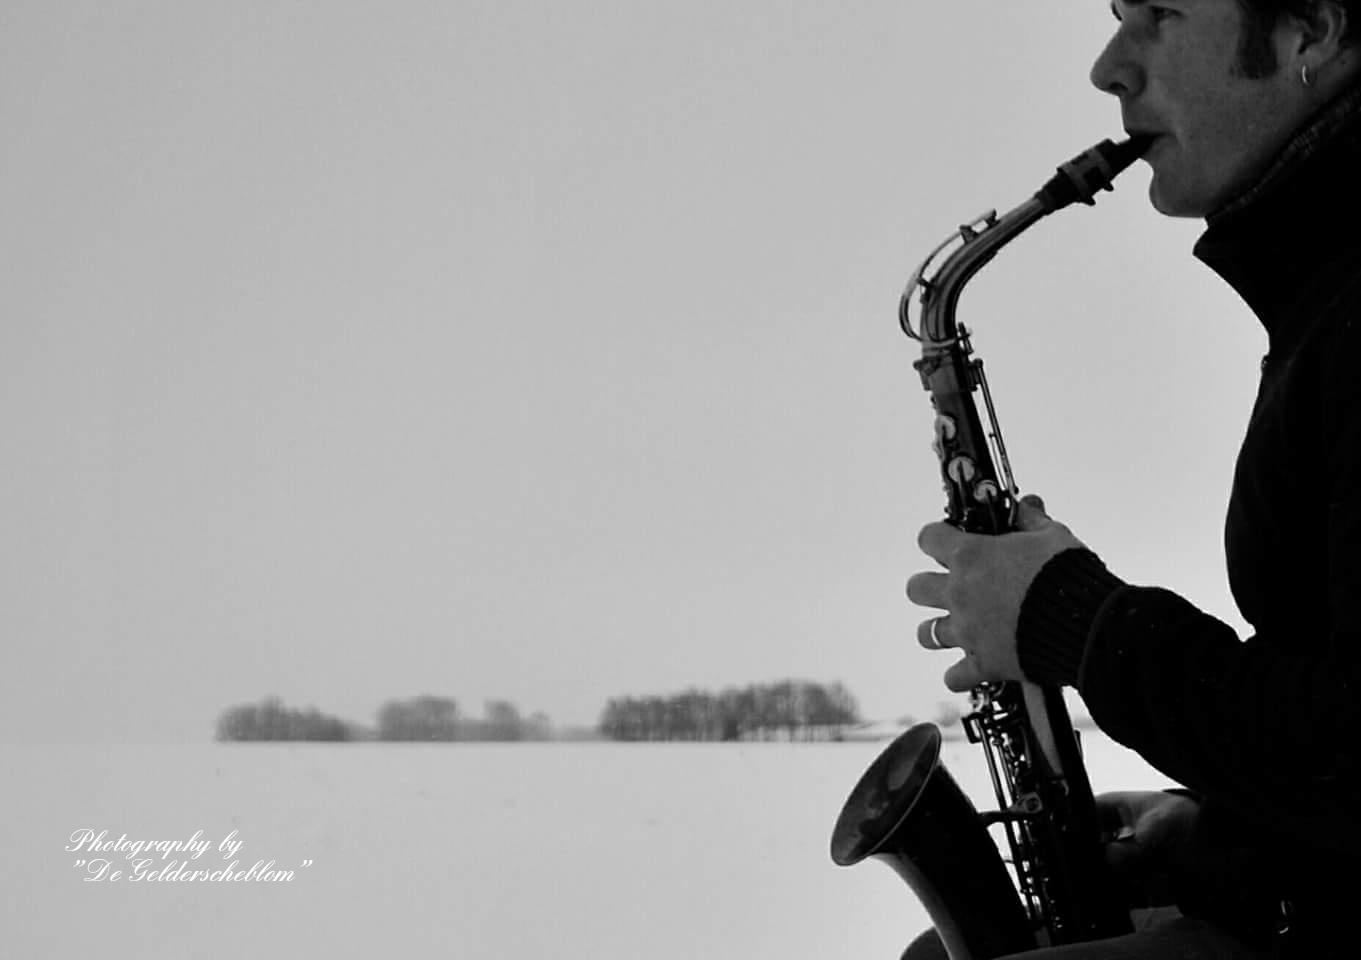 Sax in the snow